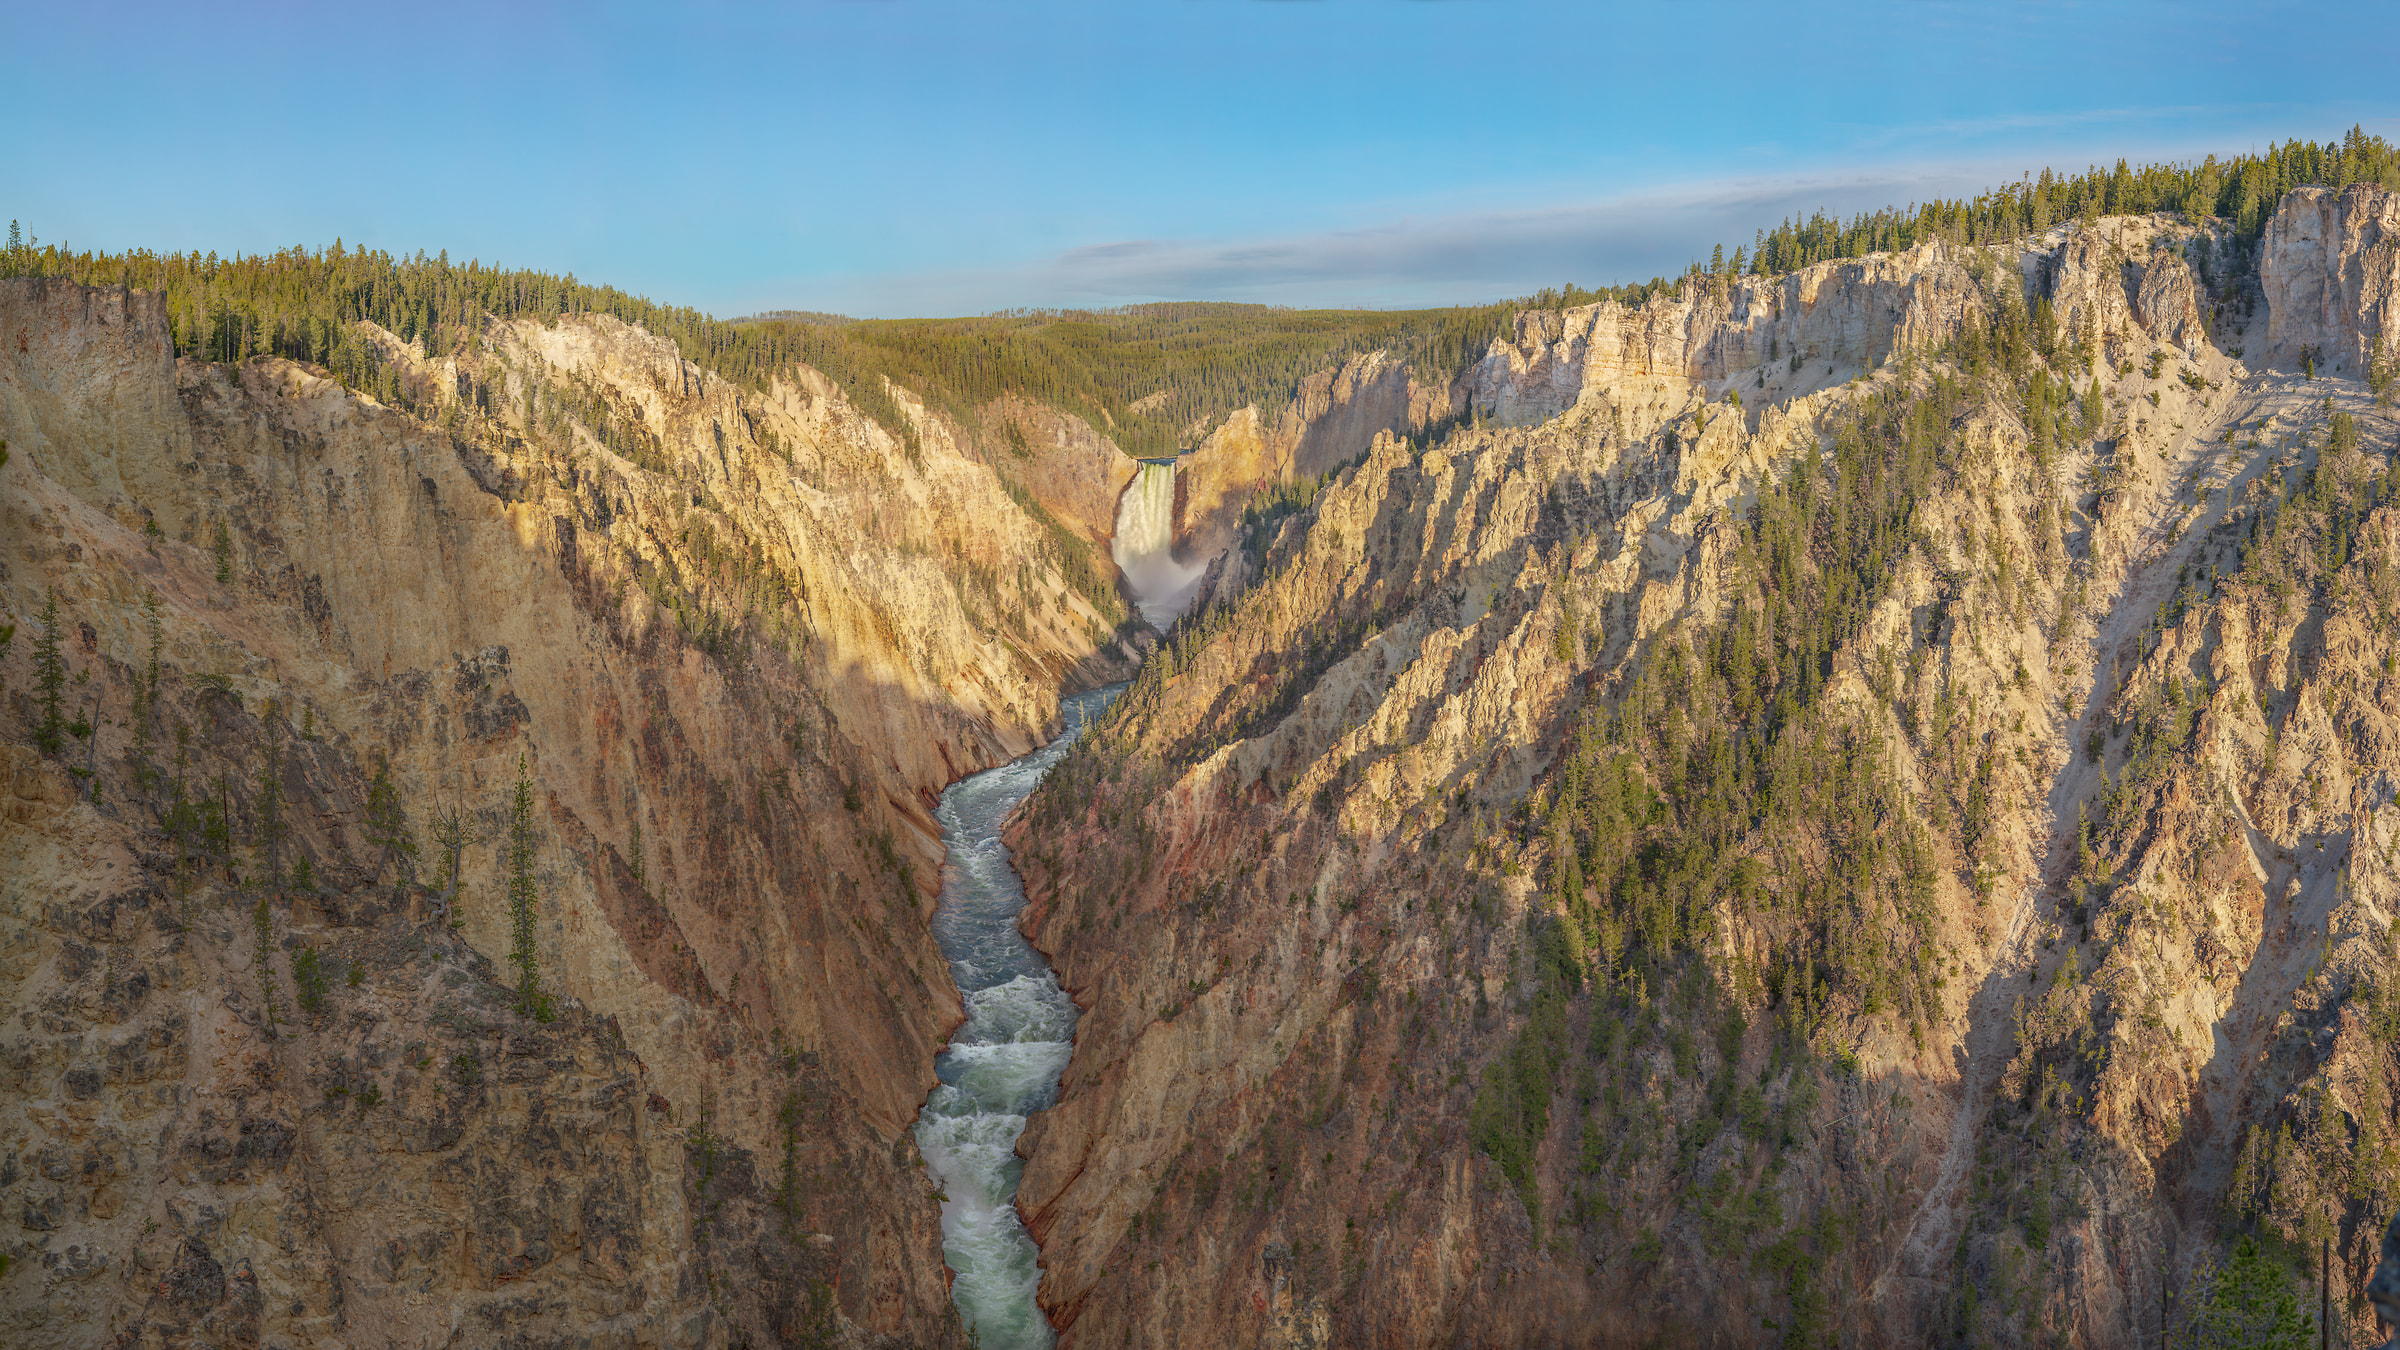 5,109 megapixels! A very high resolution, large-format VAST photo print of Yellowstone Falls; landscape photograph created by John Freeman in Artist Point overlooking the Lower Falls from south side of Yellowstone River, Yellowstone National Park, Wyoming